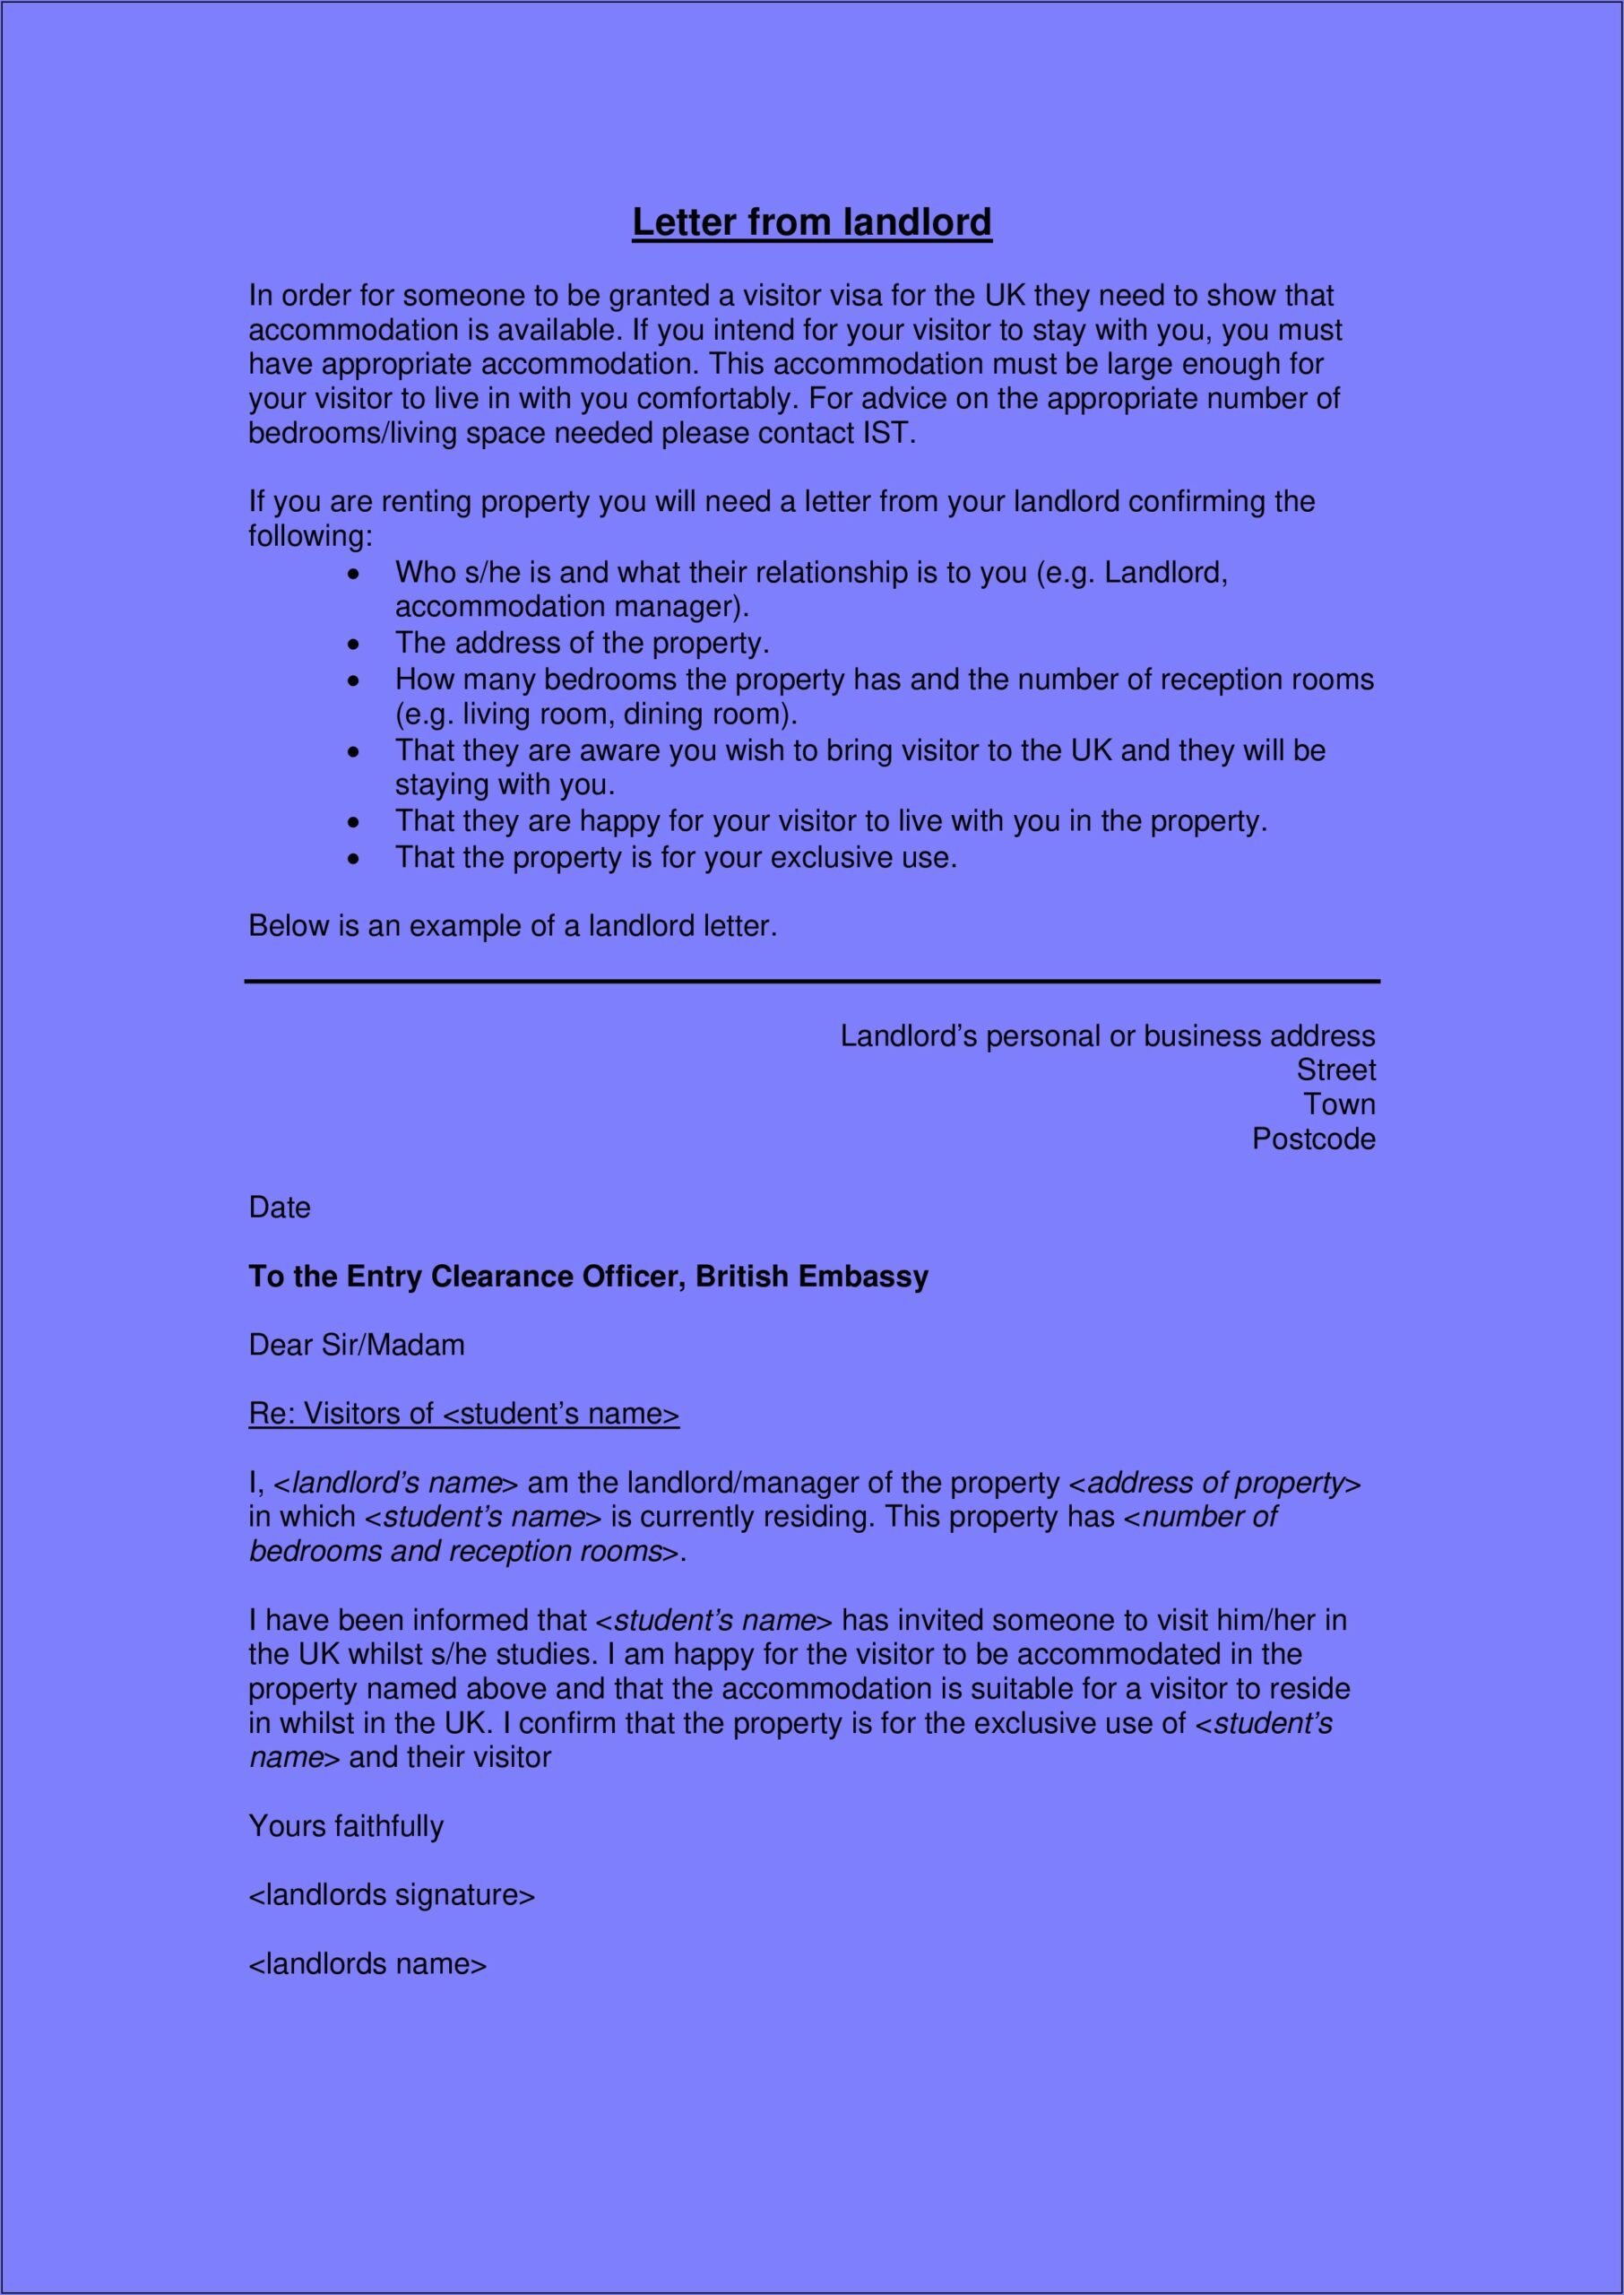 Proof Of Employment Letter Template Uk